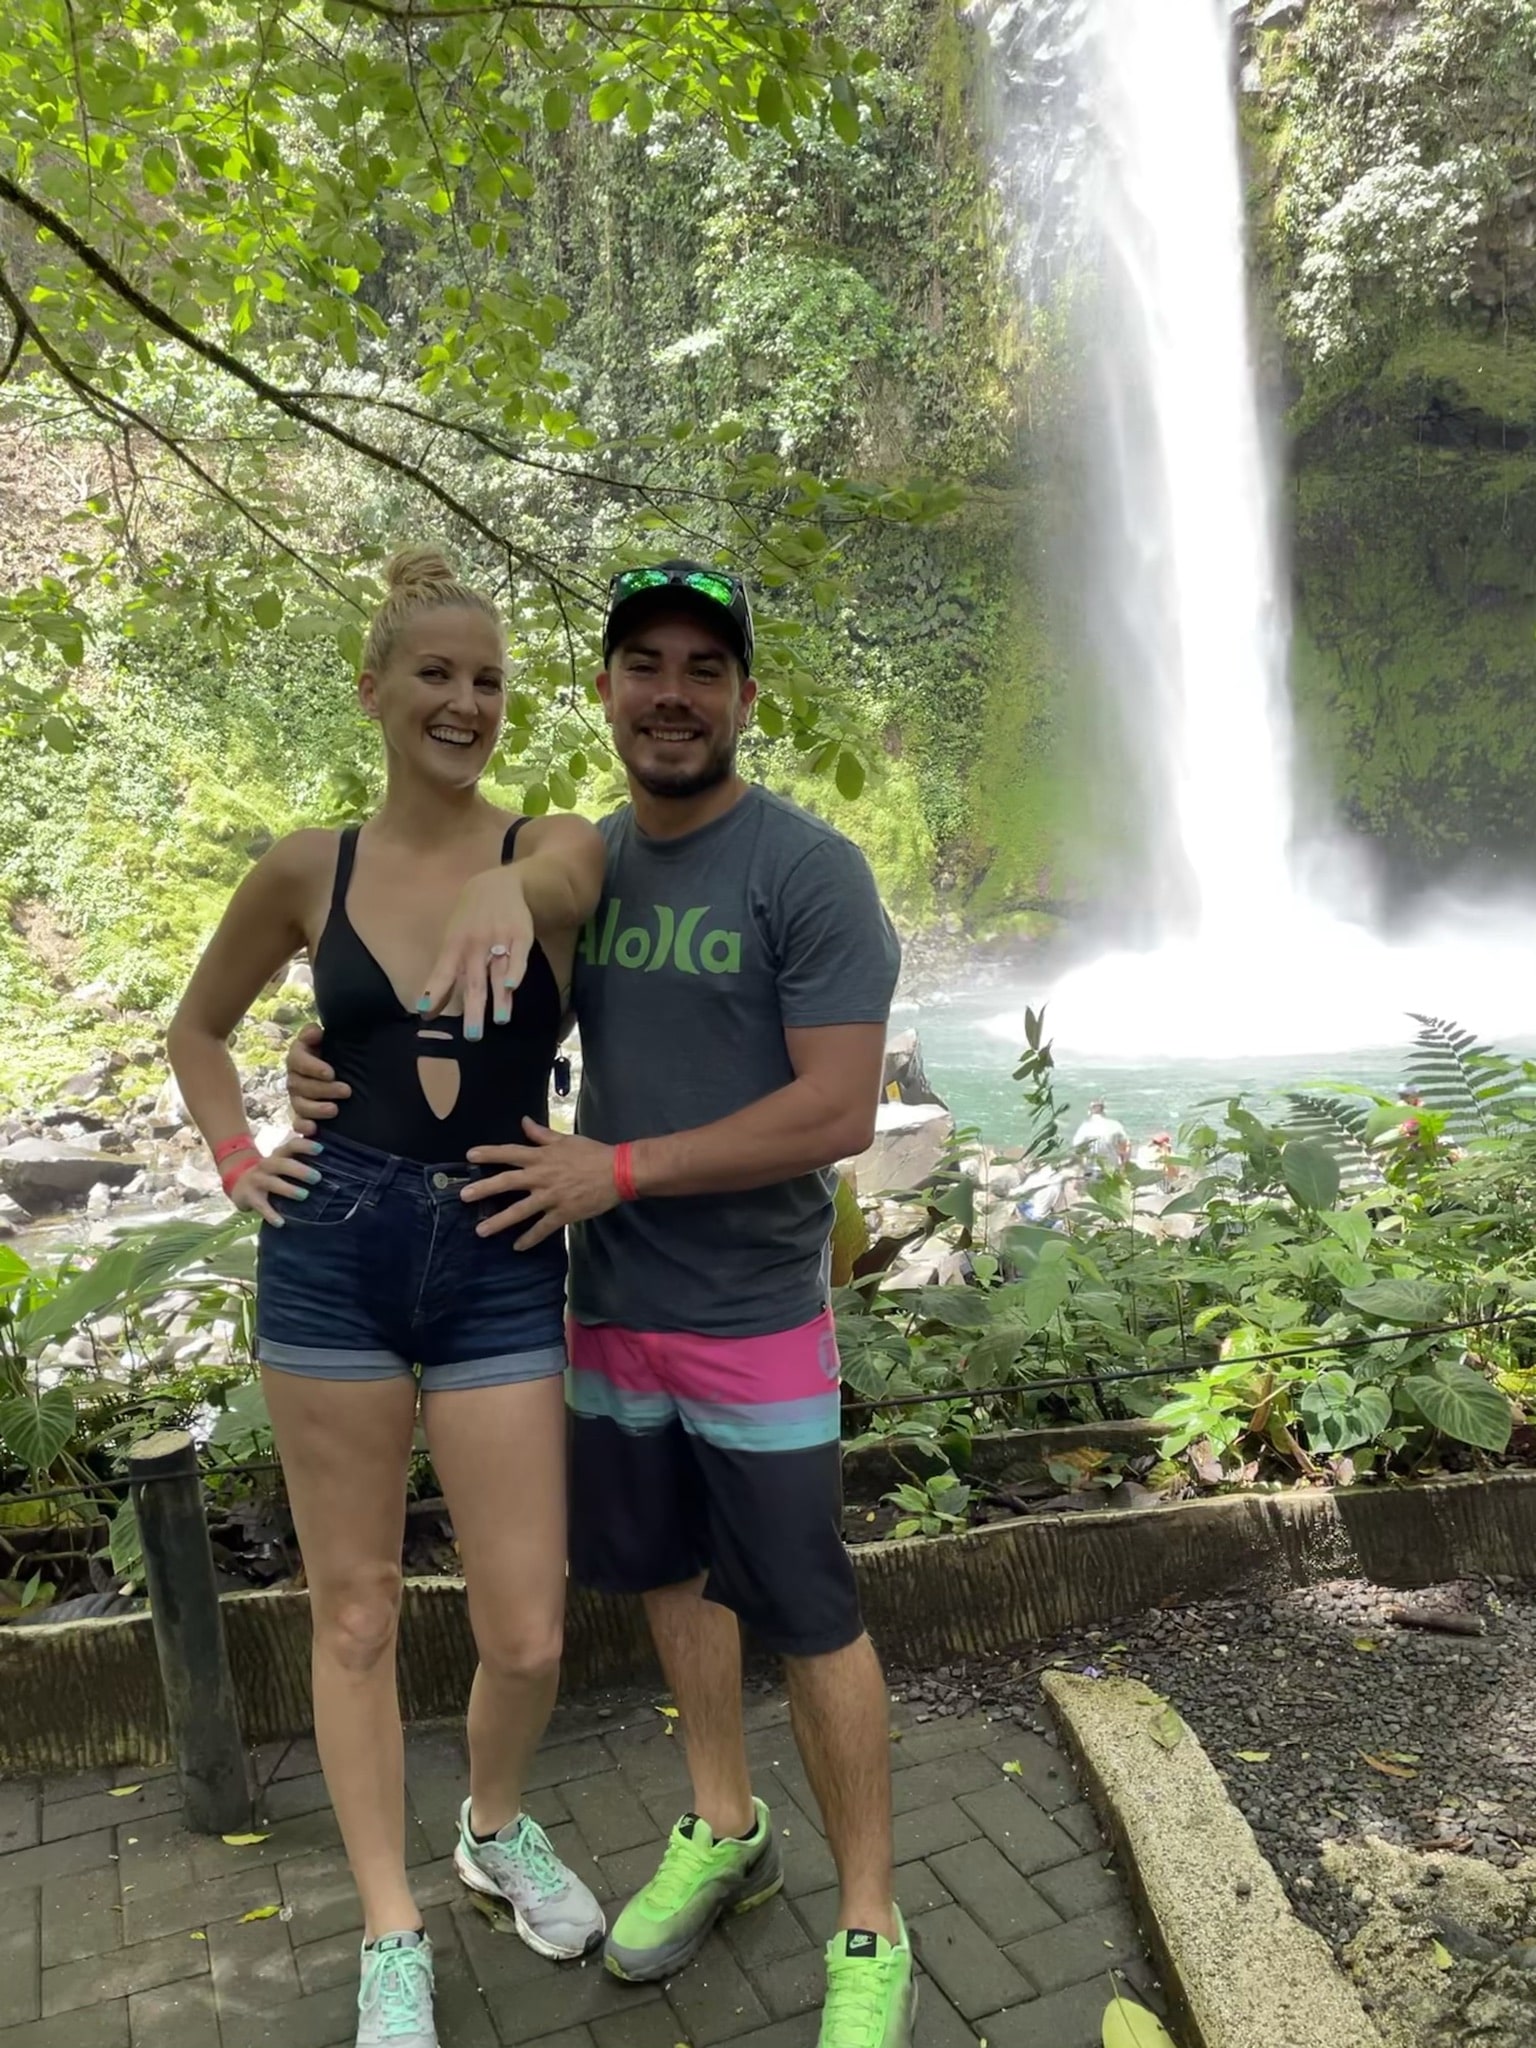 bride showing off her new engagement ring with her groom standing next to her smiling after their costa rica waterfall marriage proposal.